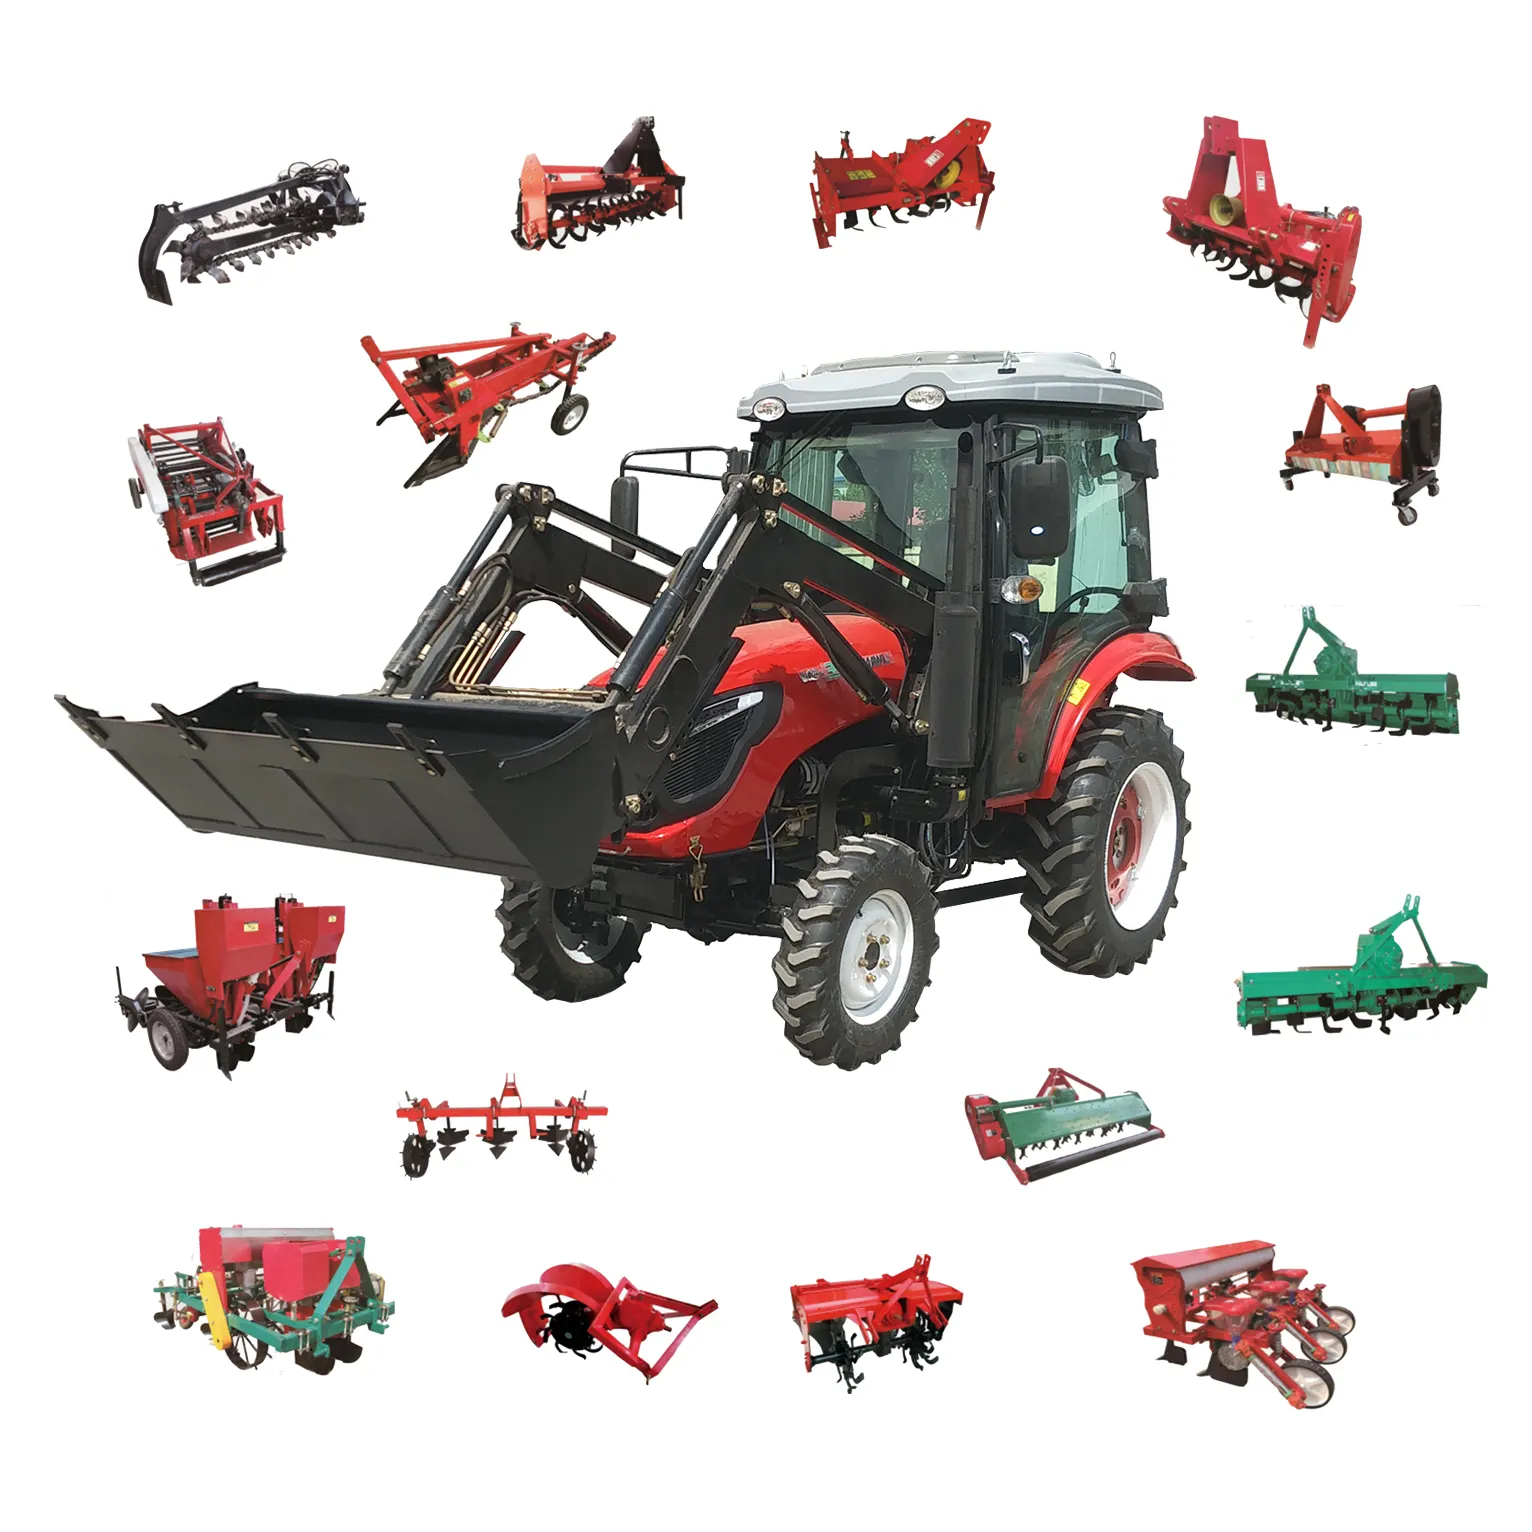 Cheap chinese 7-230HP small farm tractors for agriculture 120 hp 4x4 agriculture mini tractors with front loader